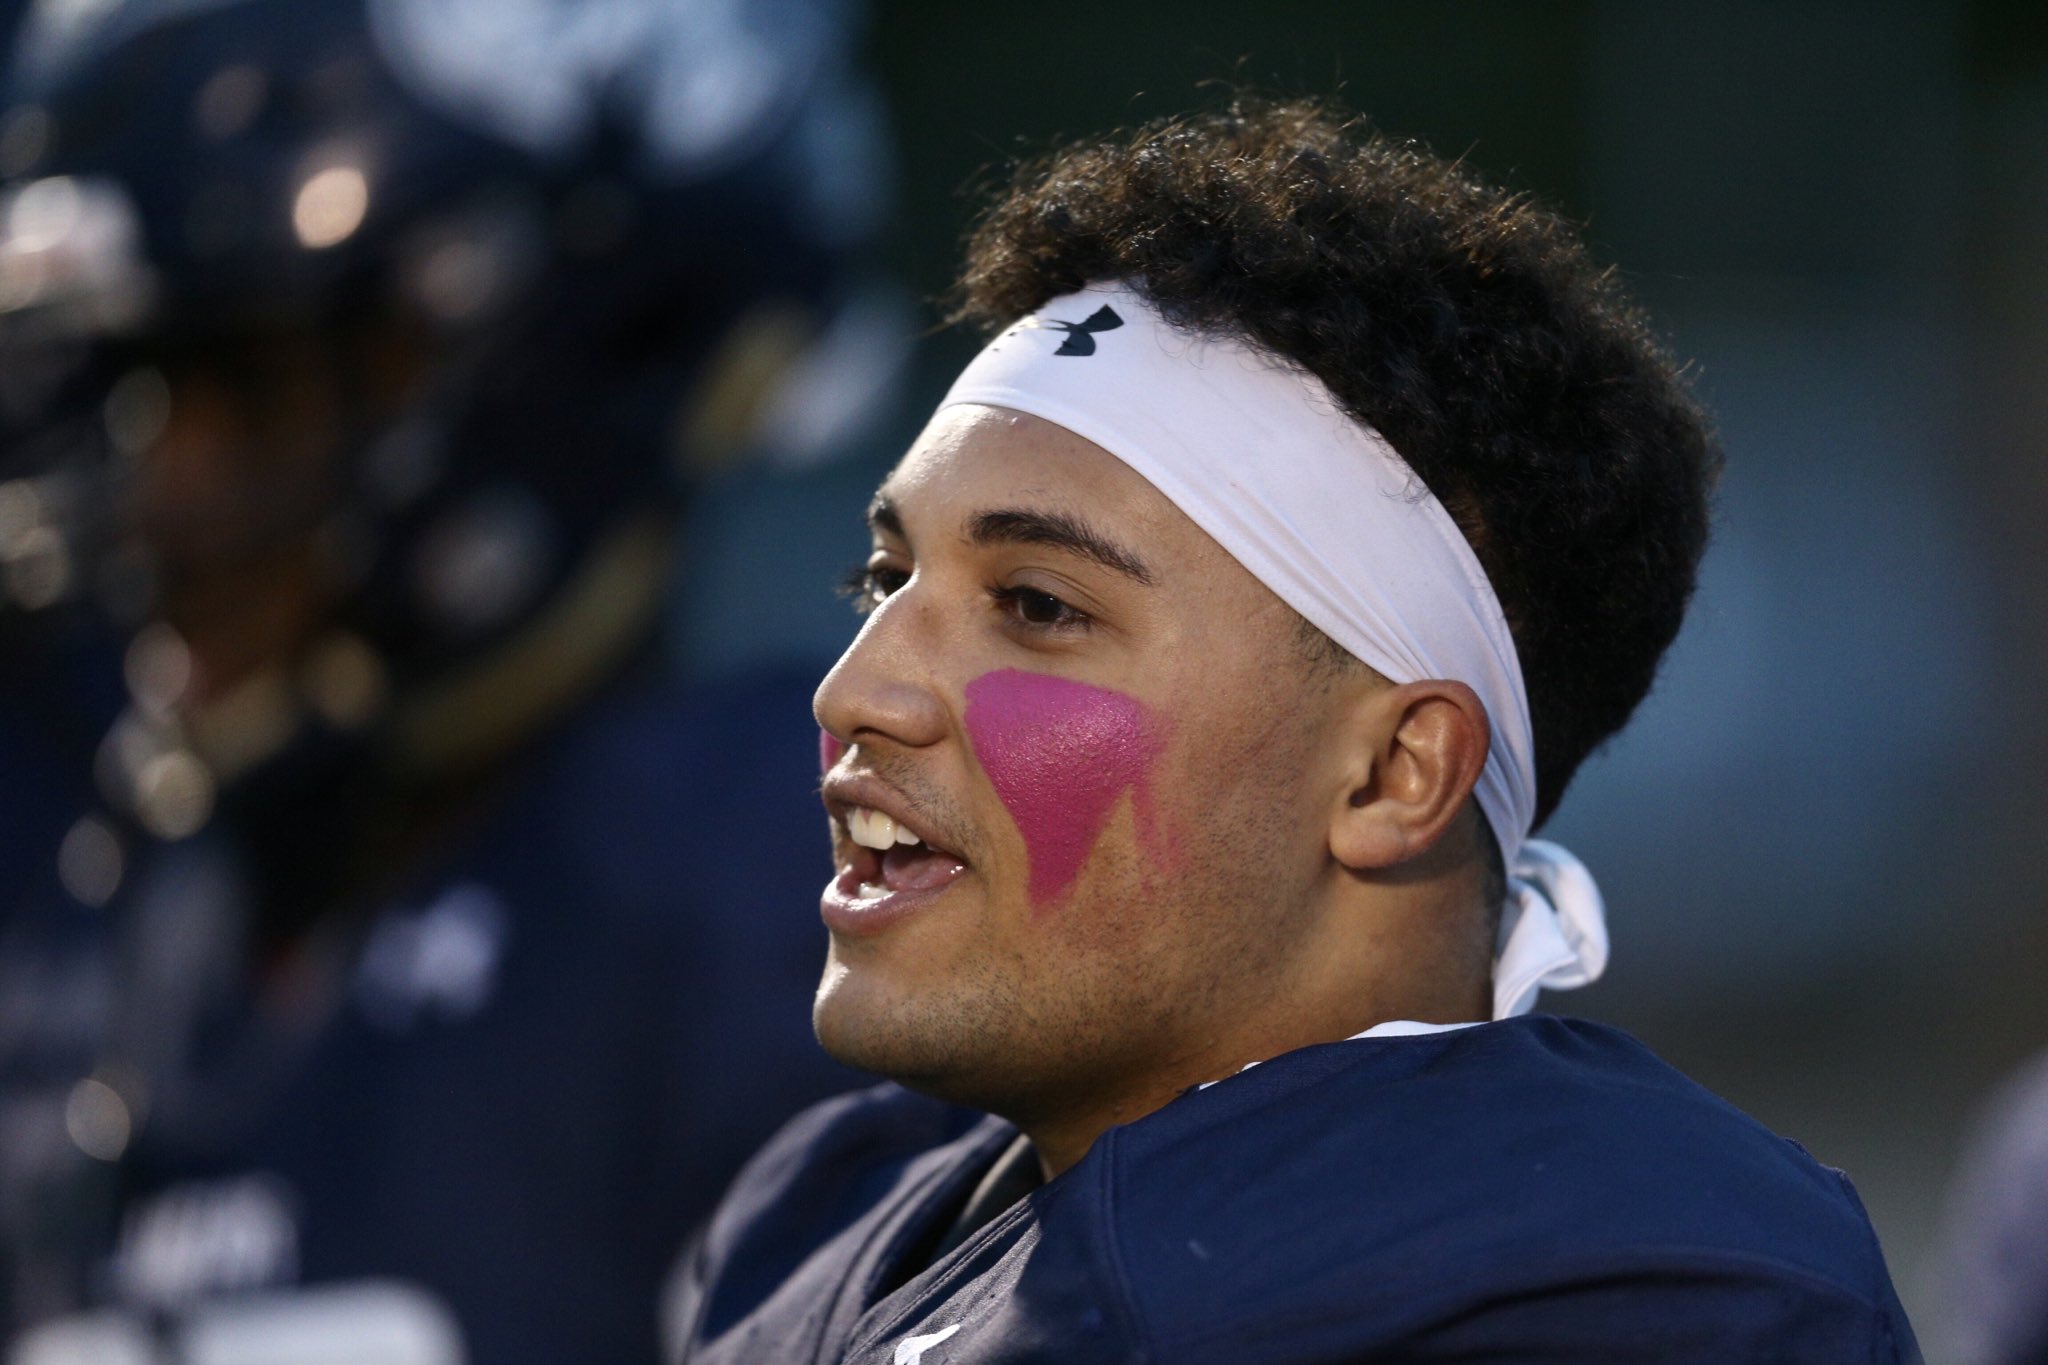 Jamie Germano on X: Participating in Breast Cancer Awareness month  ⁦@ERidgeLancers⁩ players are wearing pink eye black for its game against  ⁦@GreeceArcadia⁩ ⁦@DandC⁩ #football  / X